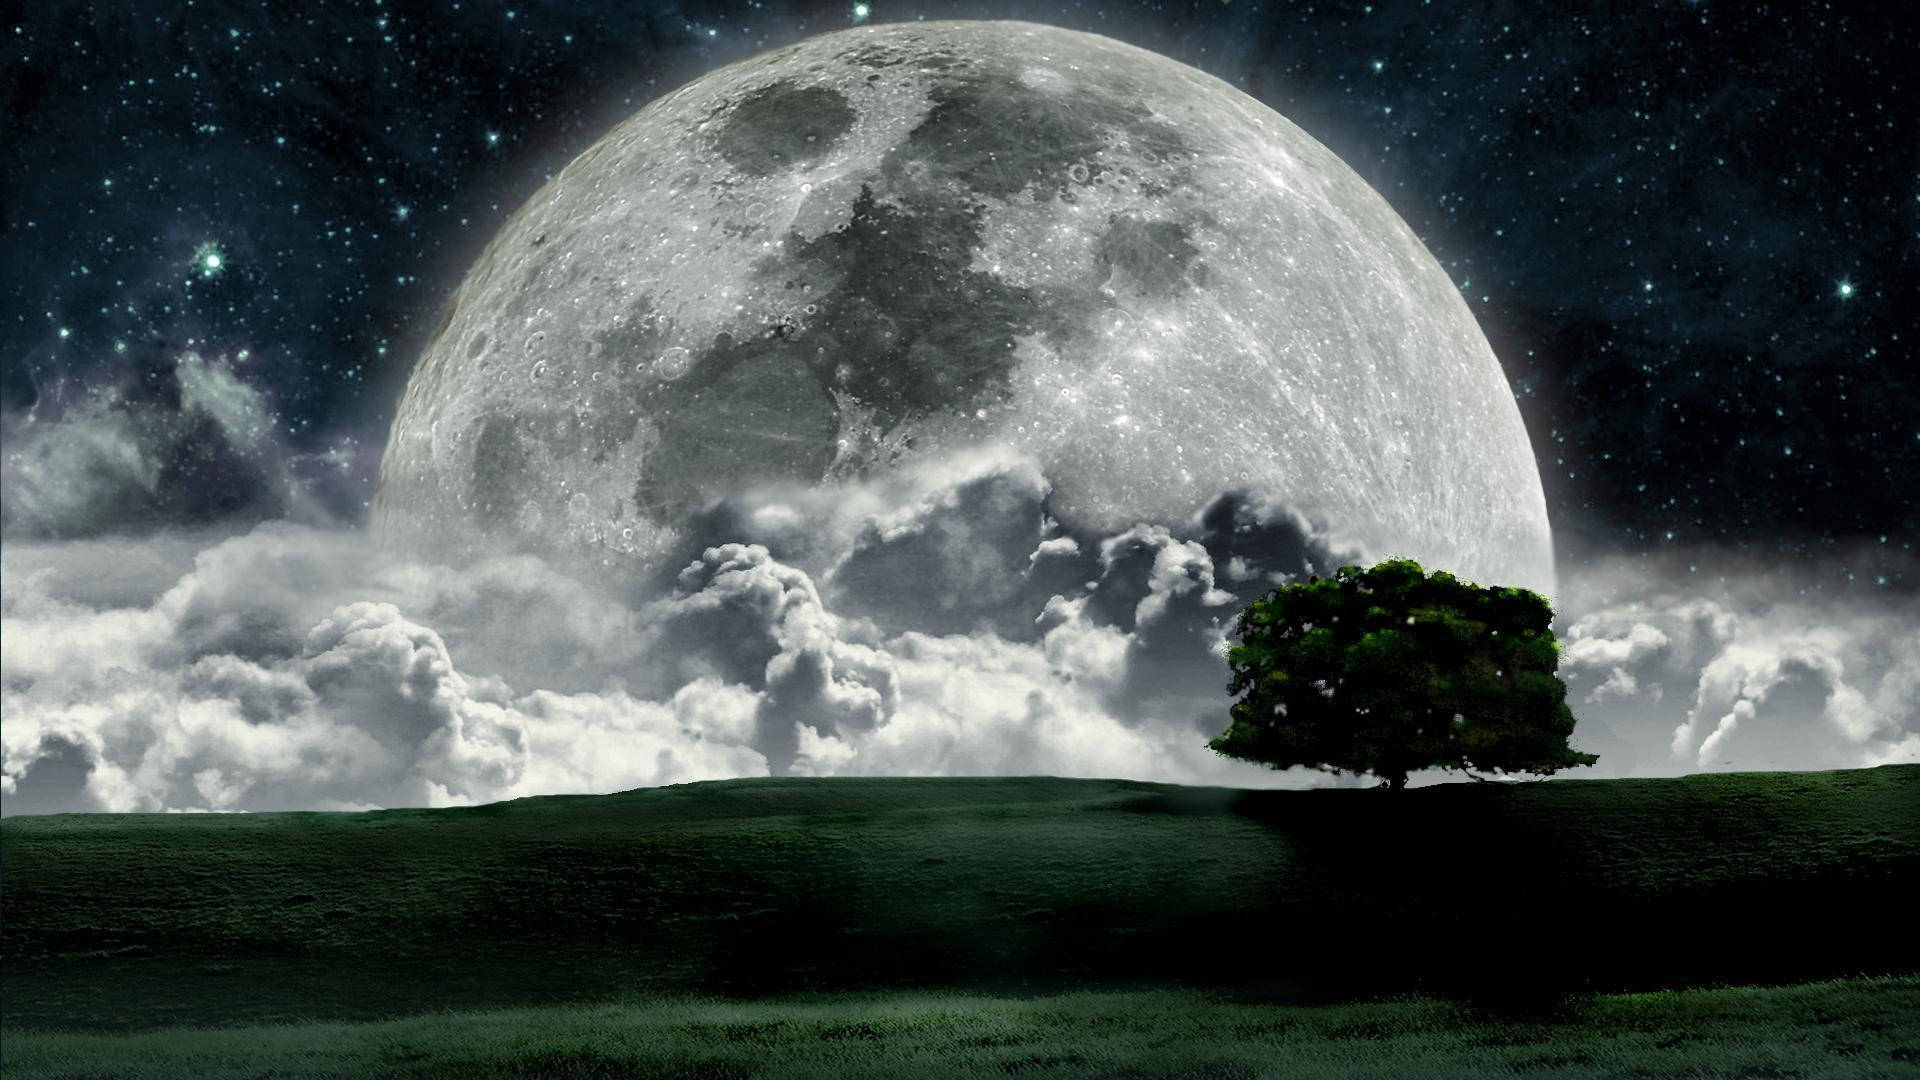 Free Moon Wallpaper Downloads, [1000+] Moon Wallpapers for FREE | Wallpapers .com